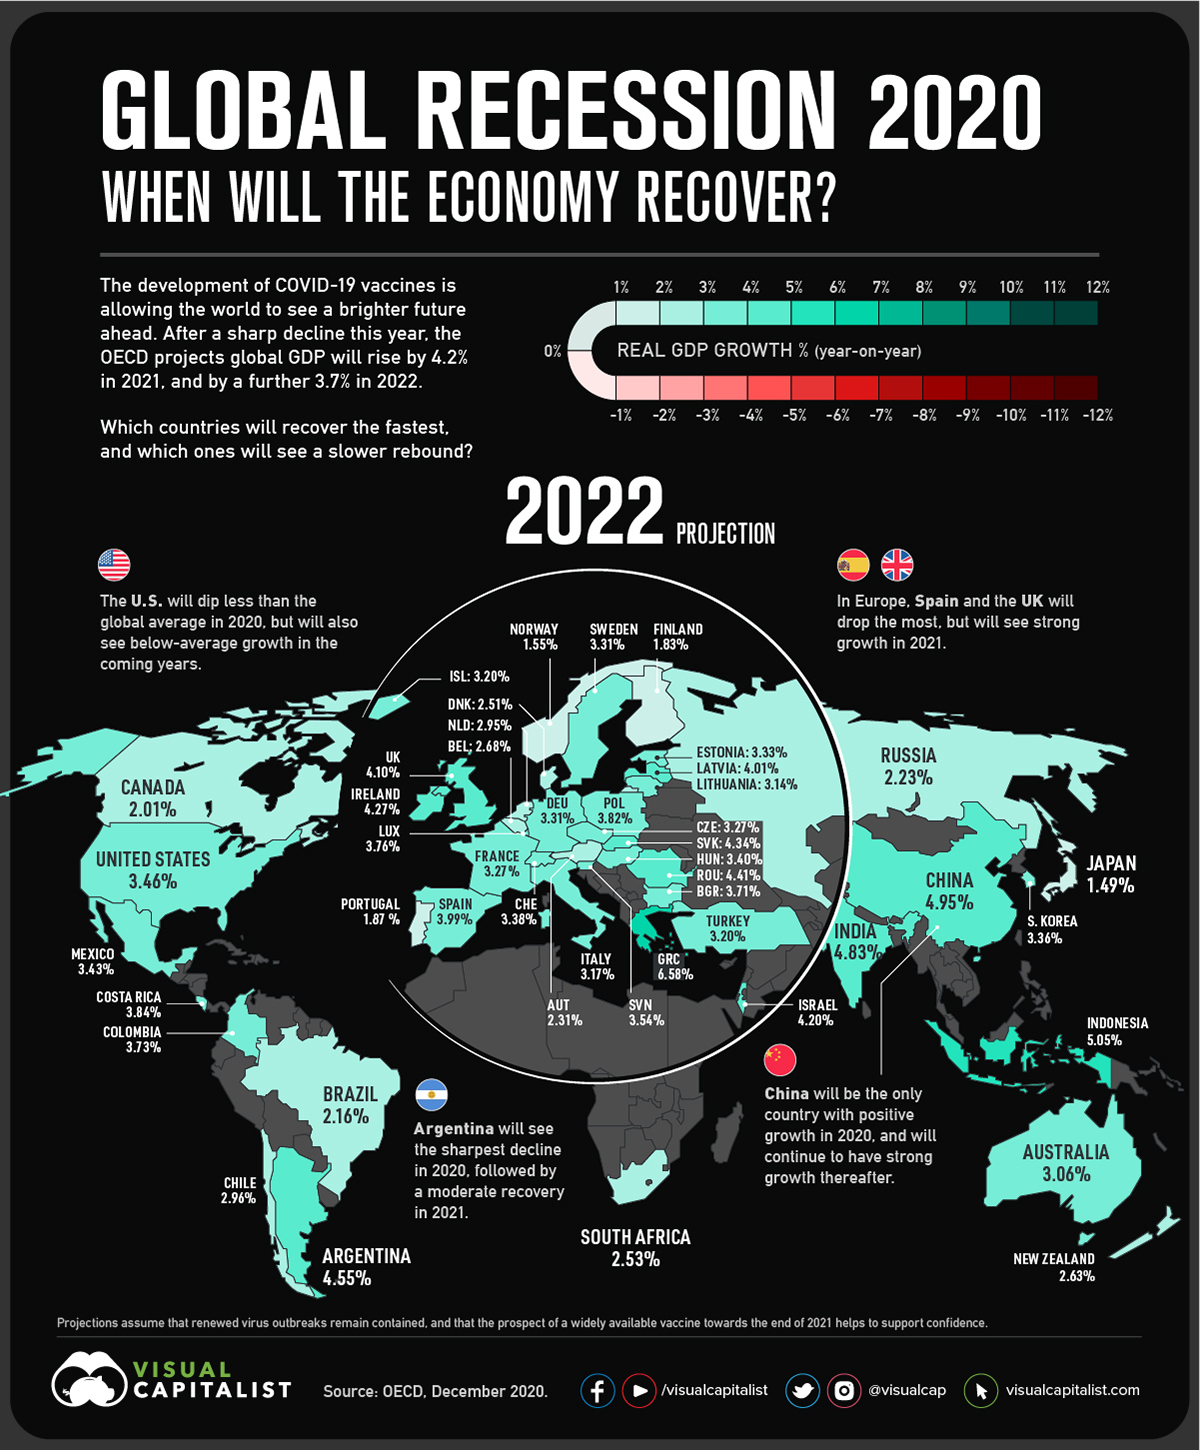 Animation Mapping the Recovery from the Global Recession of 2020